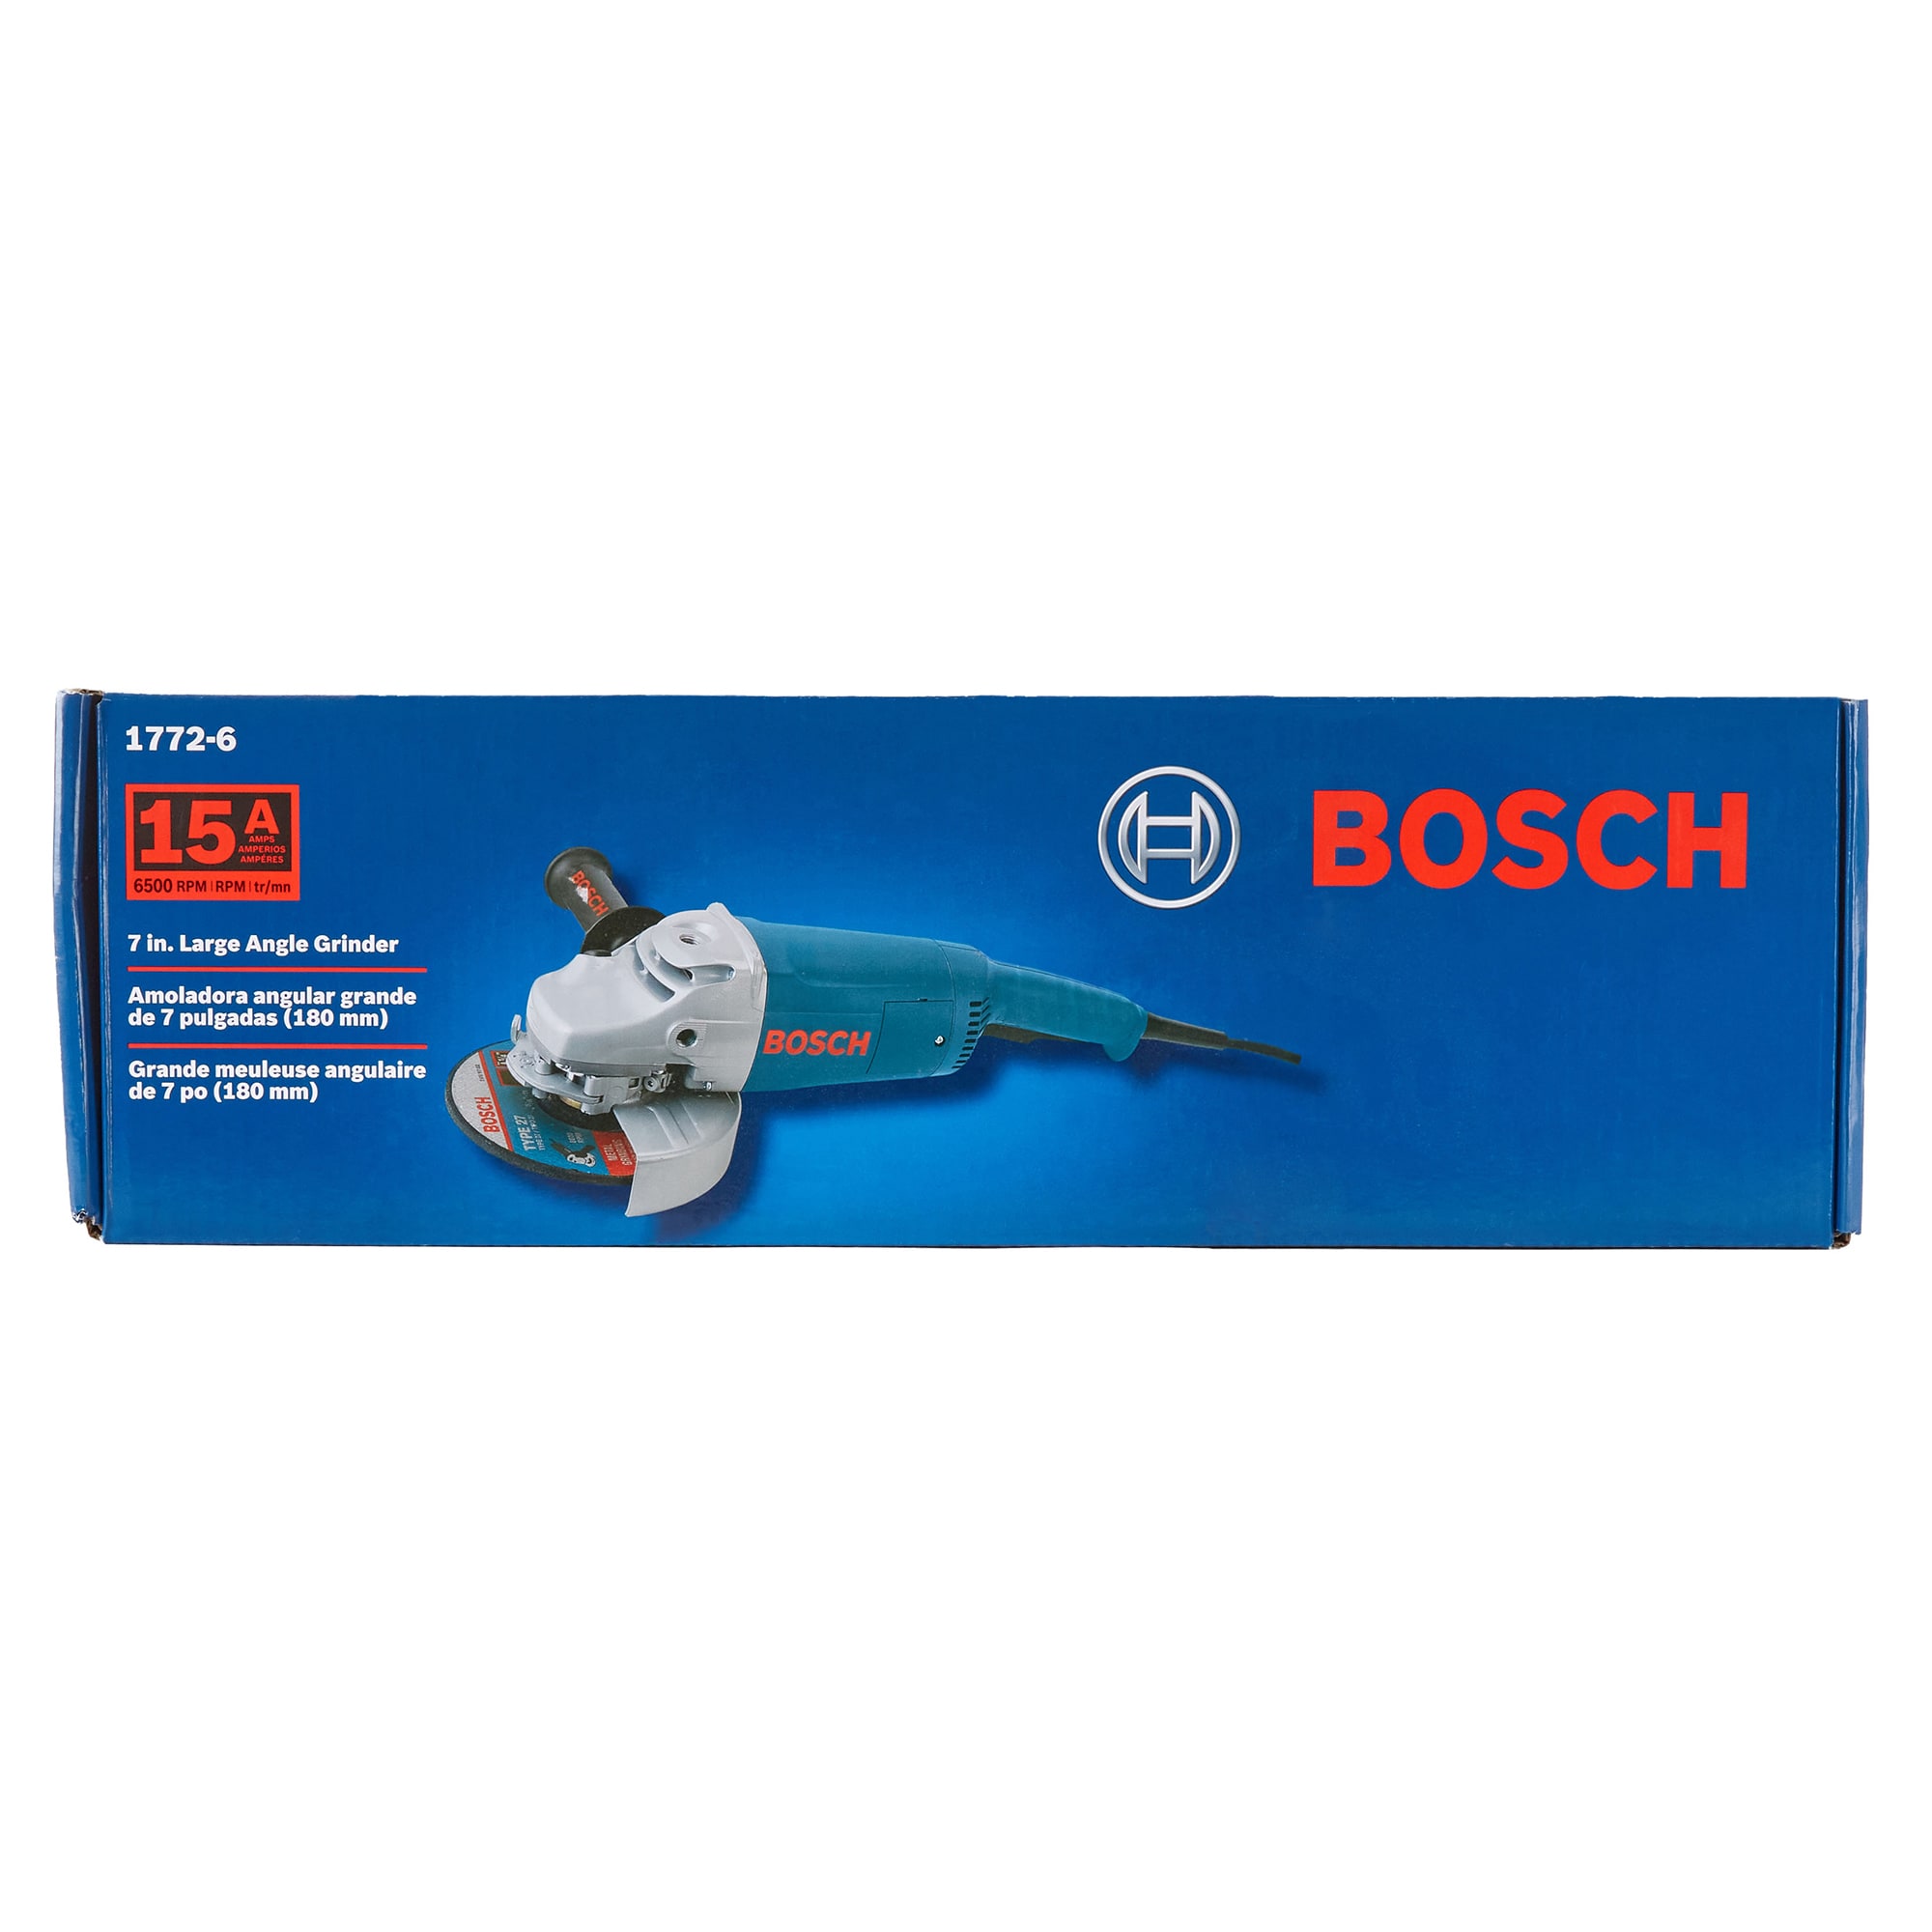 BOSCH Scintilla Electric Corded 4-1/2 in. Small Angle Grinder 0601327134